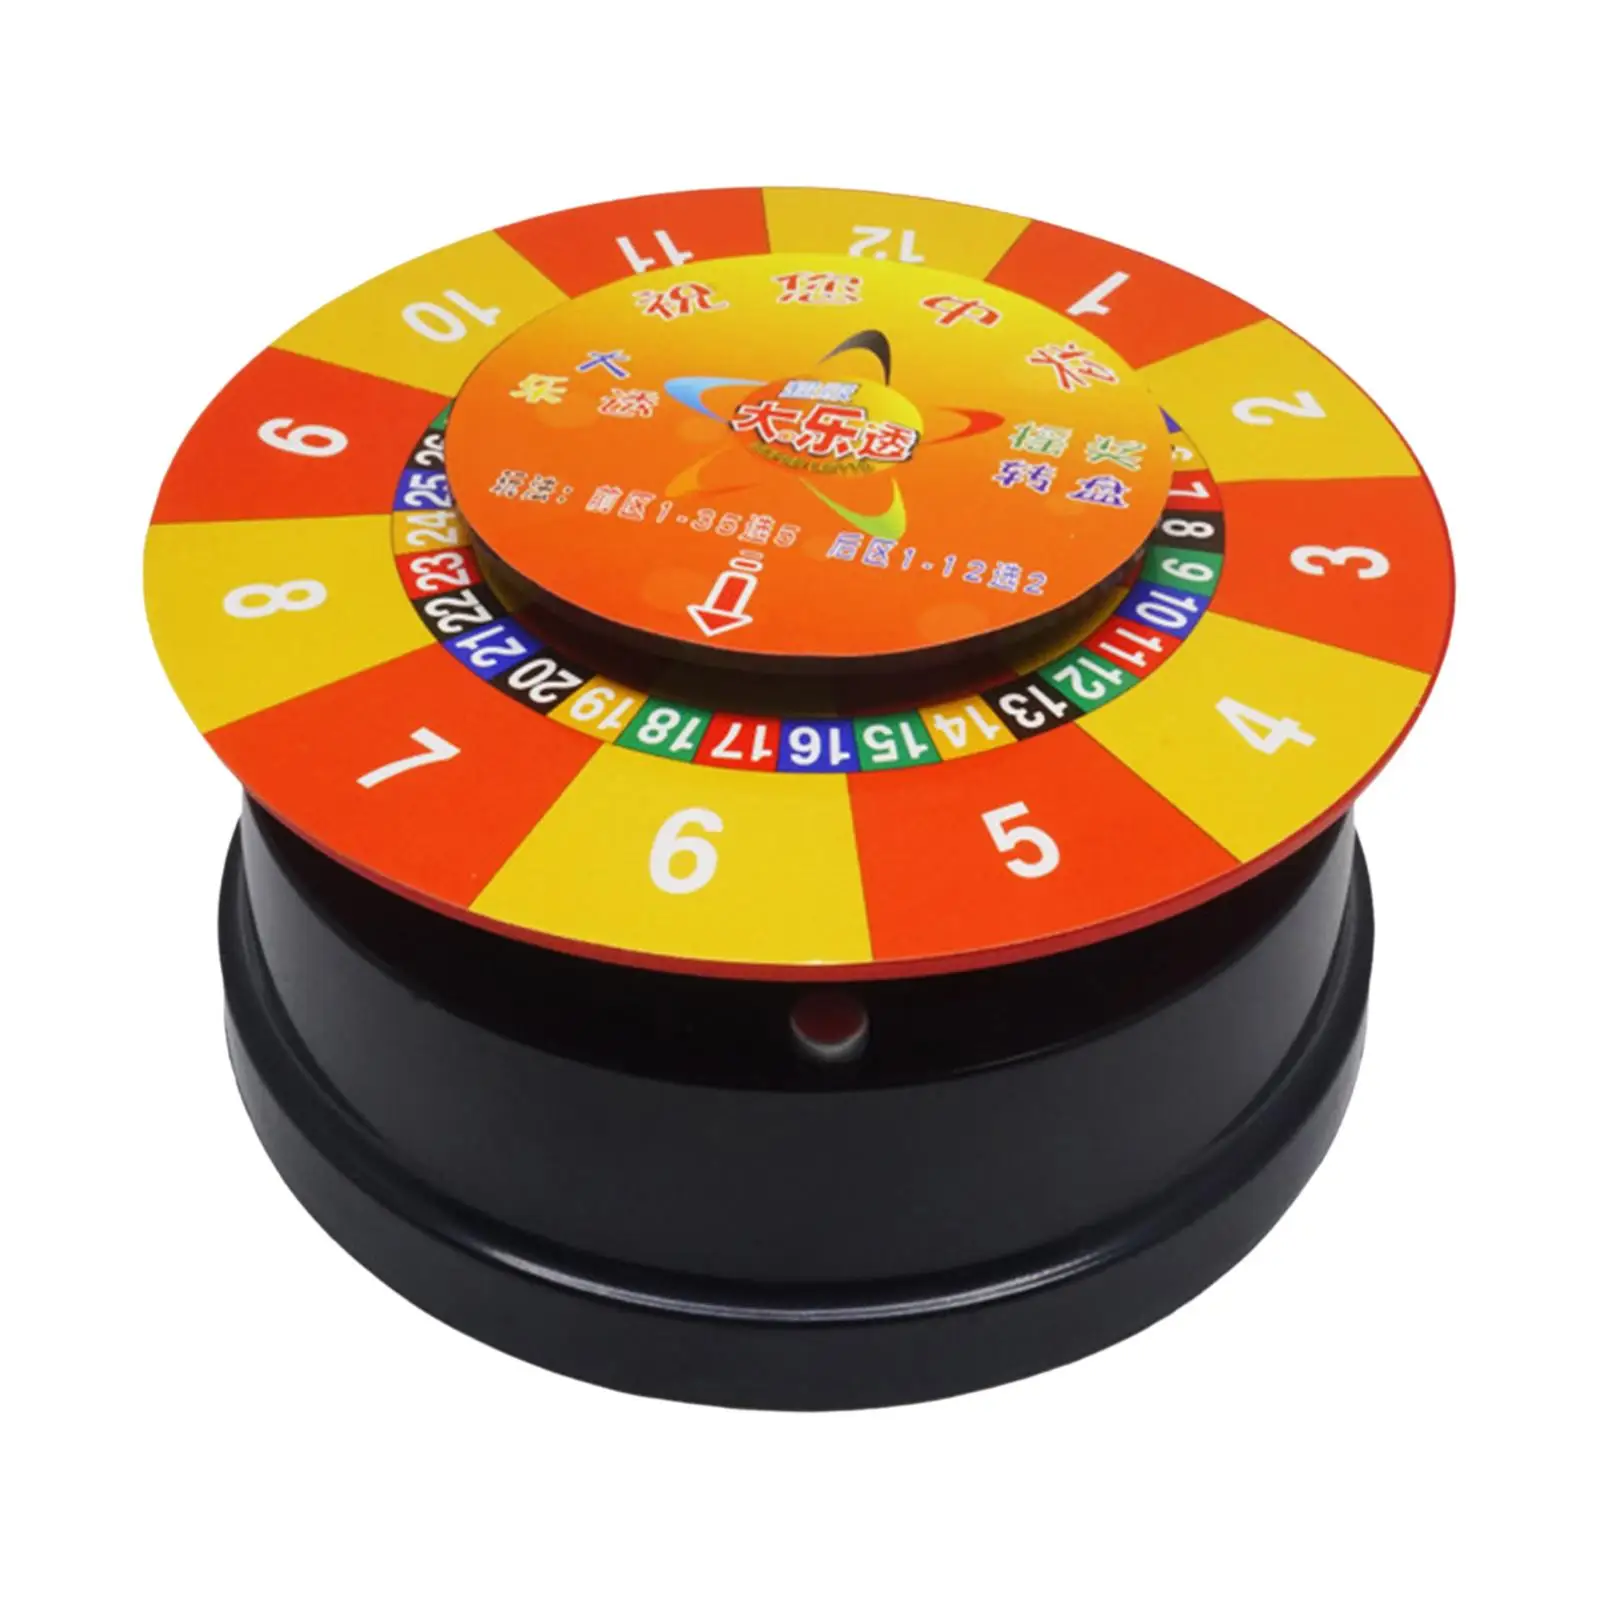 

Lottery Turntable Props Game Portable Roulette Wheel Rotating Prize Bingo Game for Family Show Party Birthday Holiday